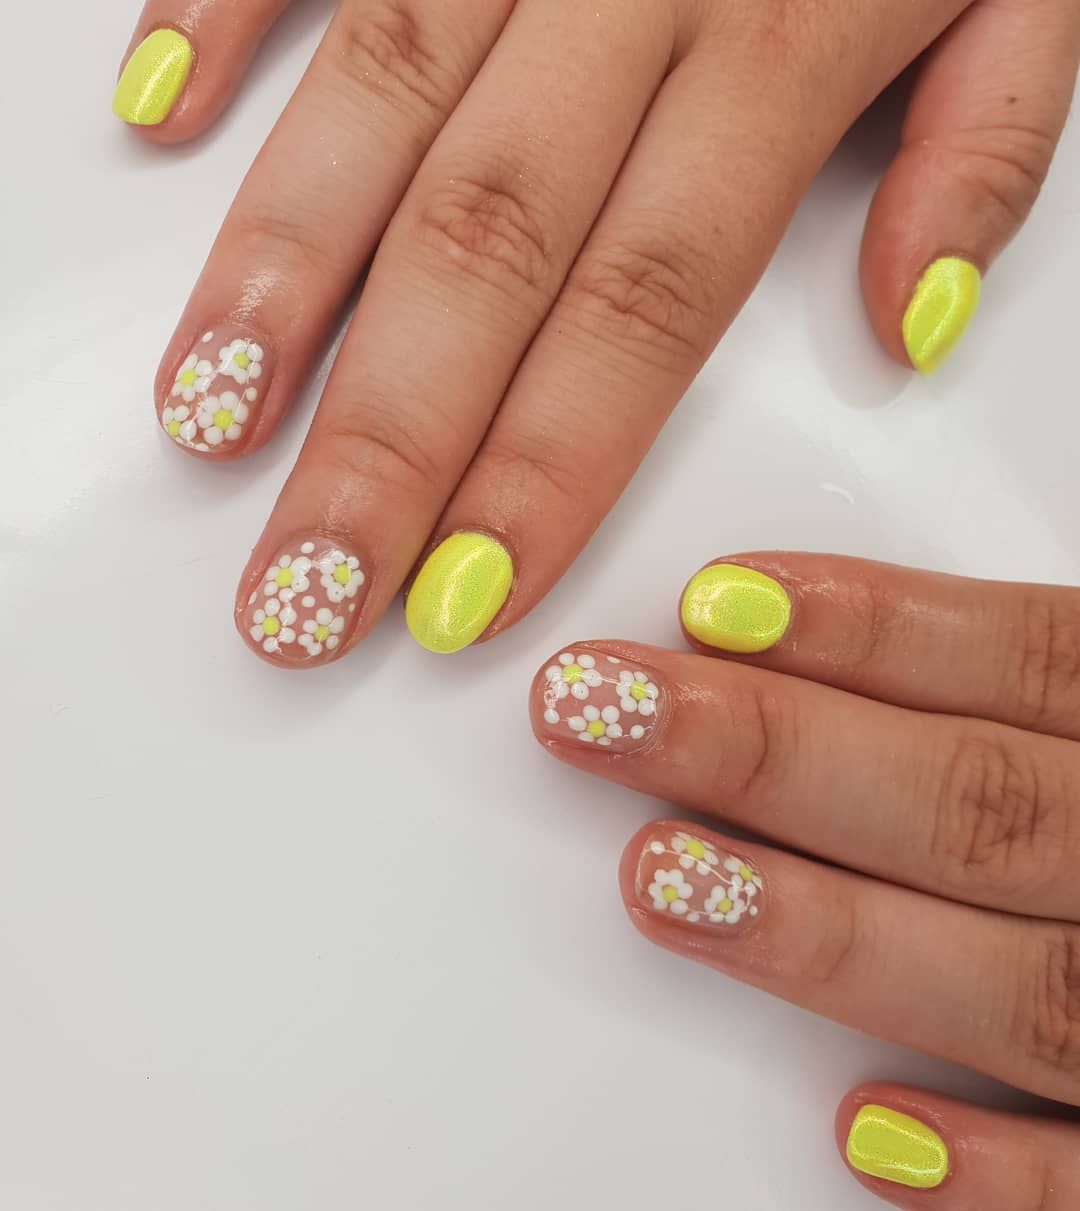 stumpy.. 90+ Hottest 3D Acrylic Nails With Flower Designs - 38 3D acrylic nails with flower designs